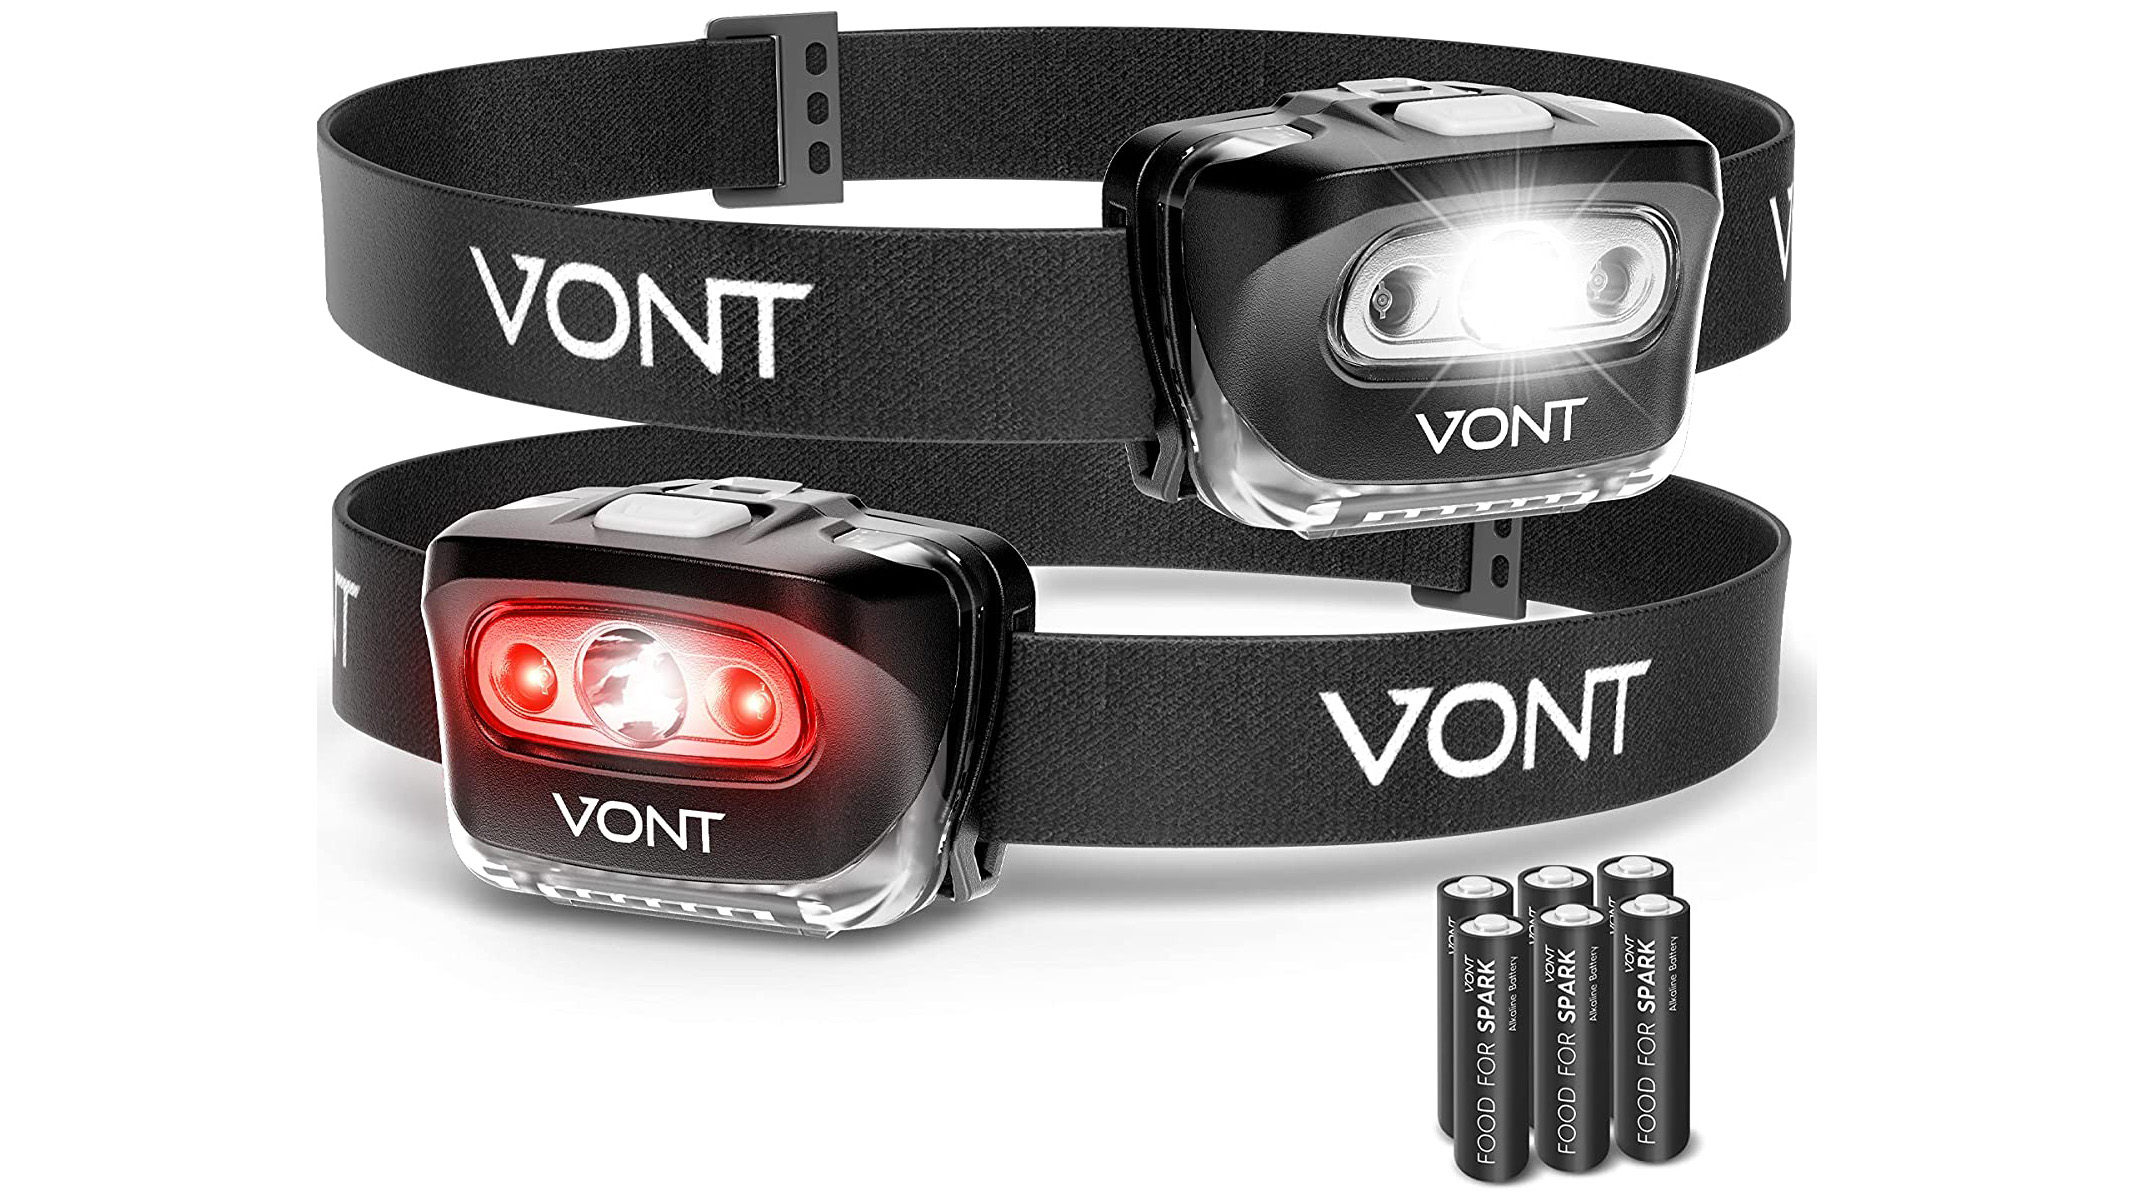 Product photo of the Vont Spark headlamp